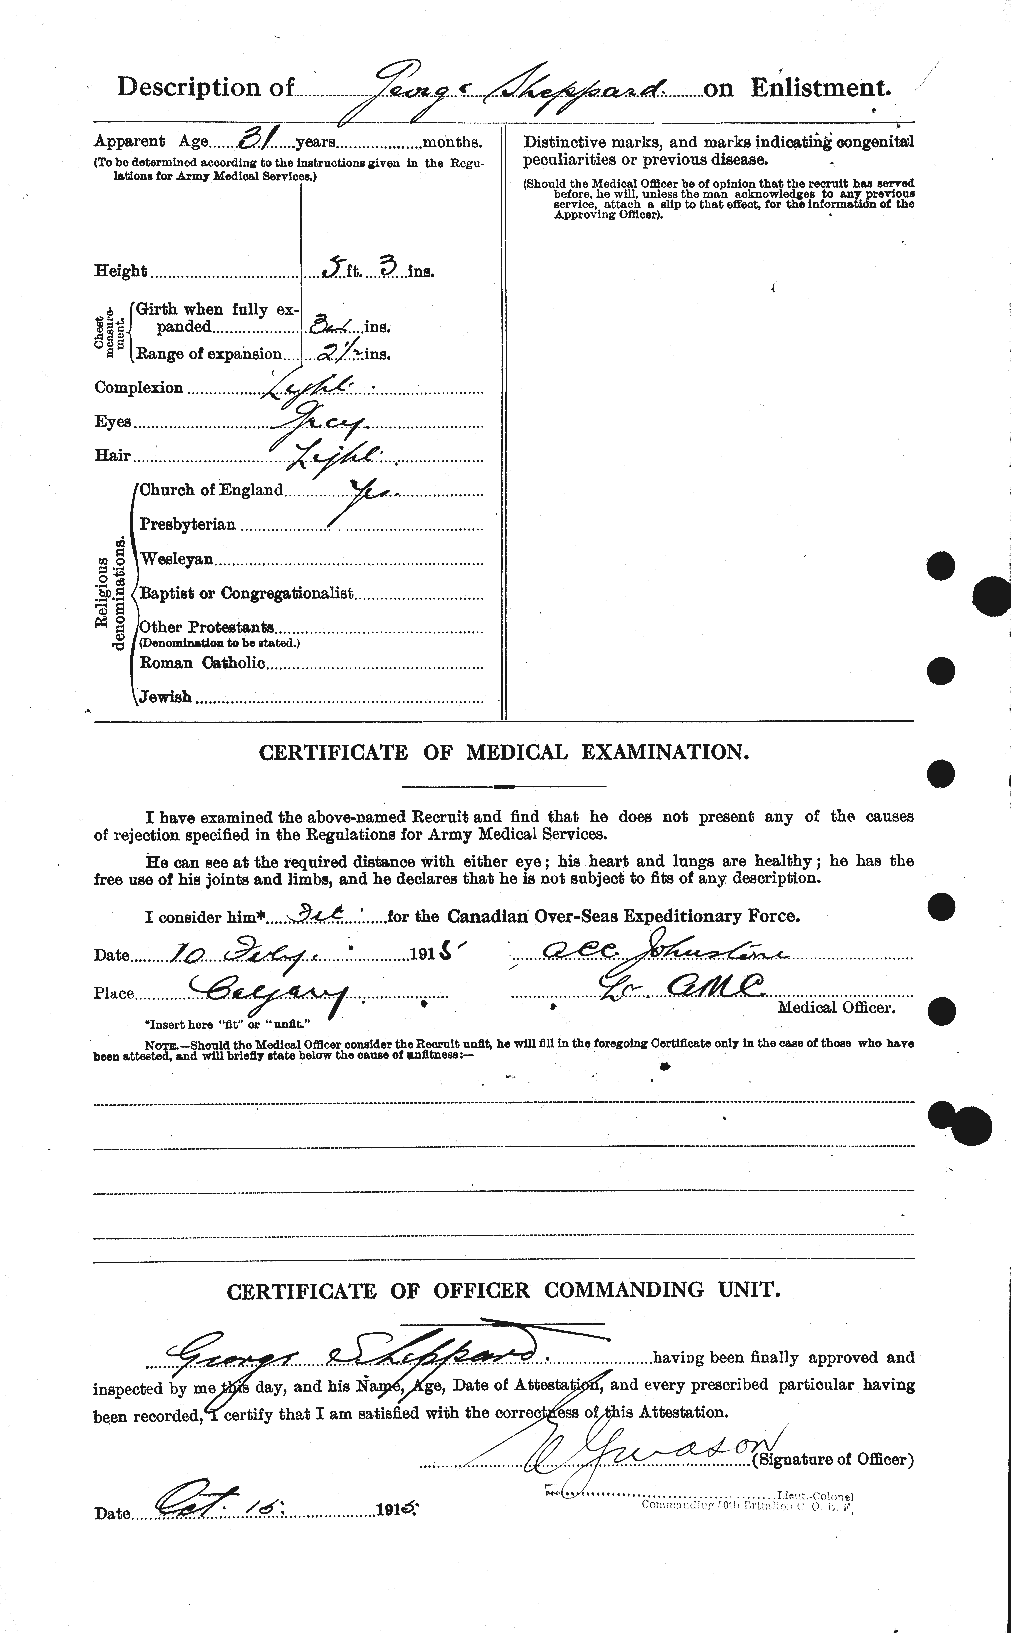 Personnel Records of the First World War - CEF 093828b